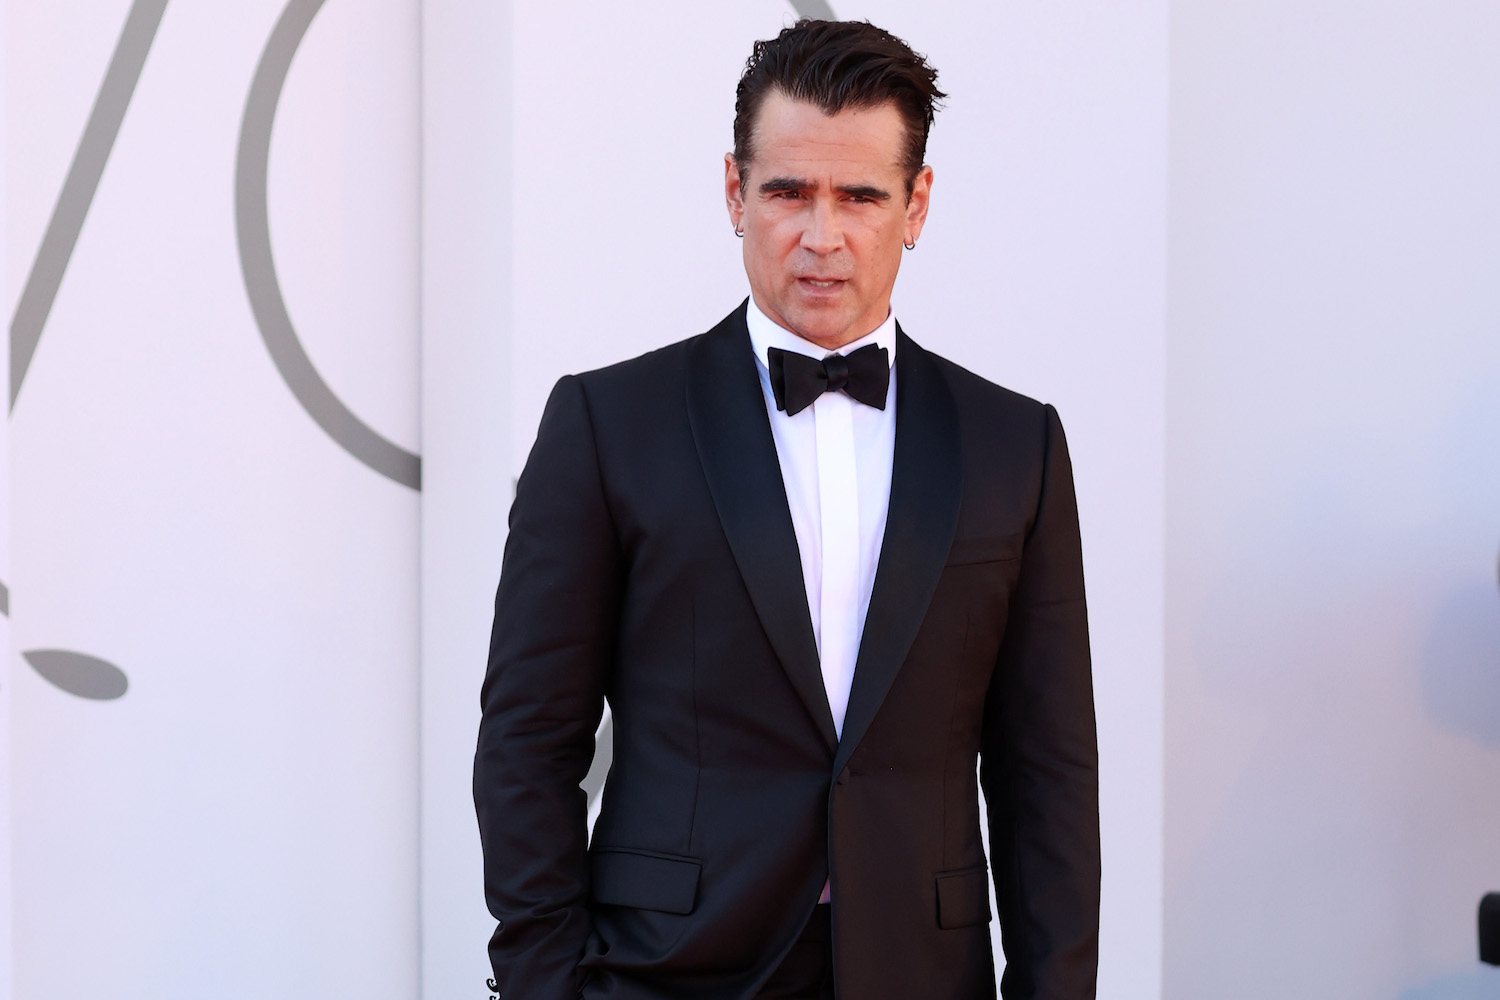 A red carpet photo of actor Collin Farrell at the 79th International Venice Film Festival